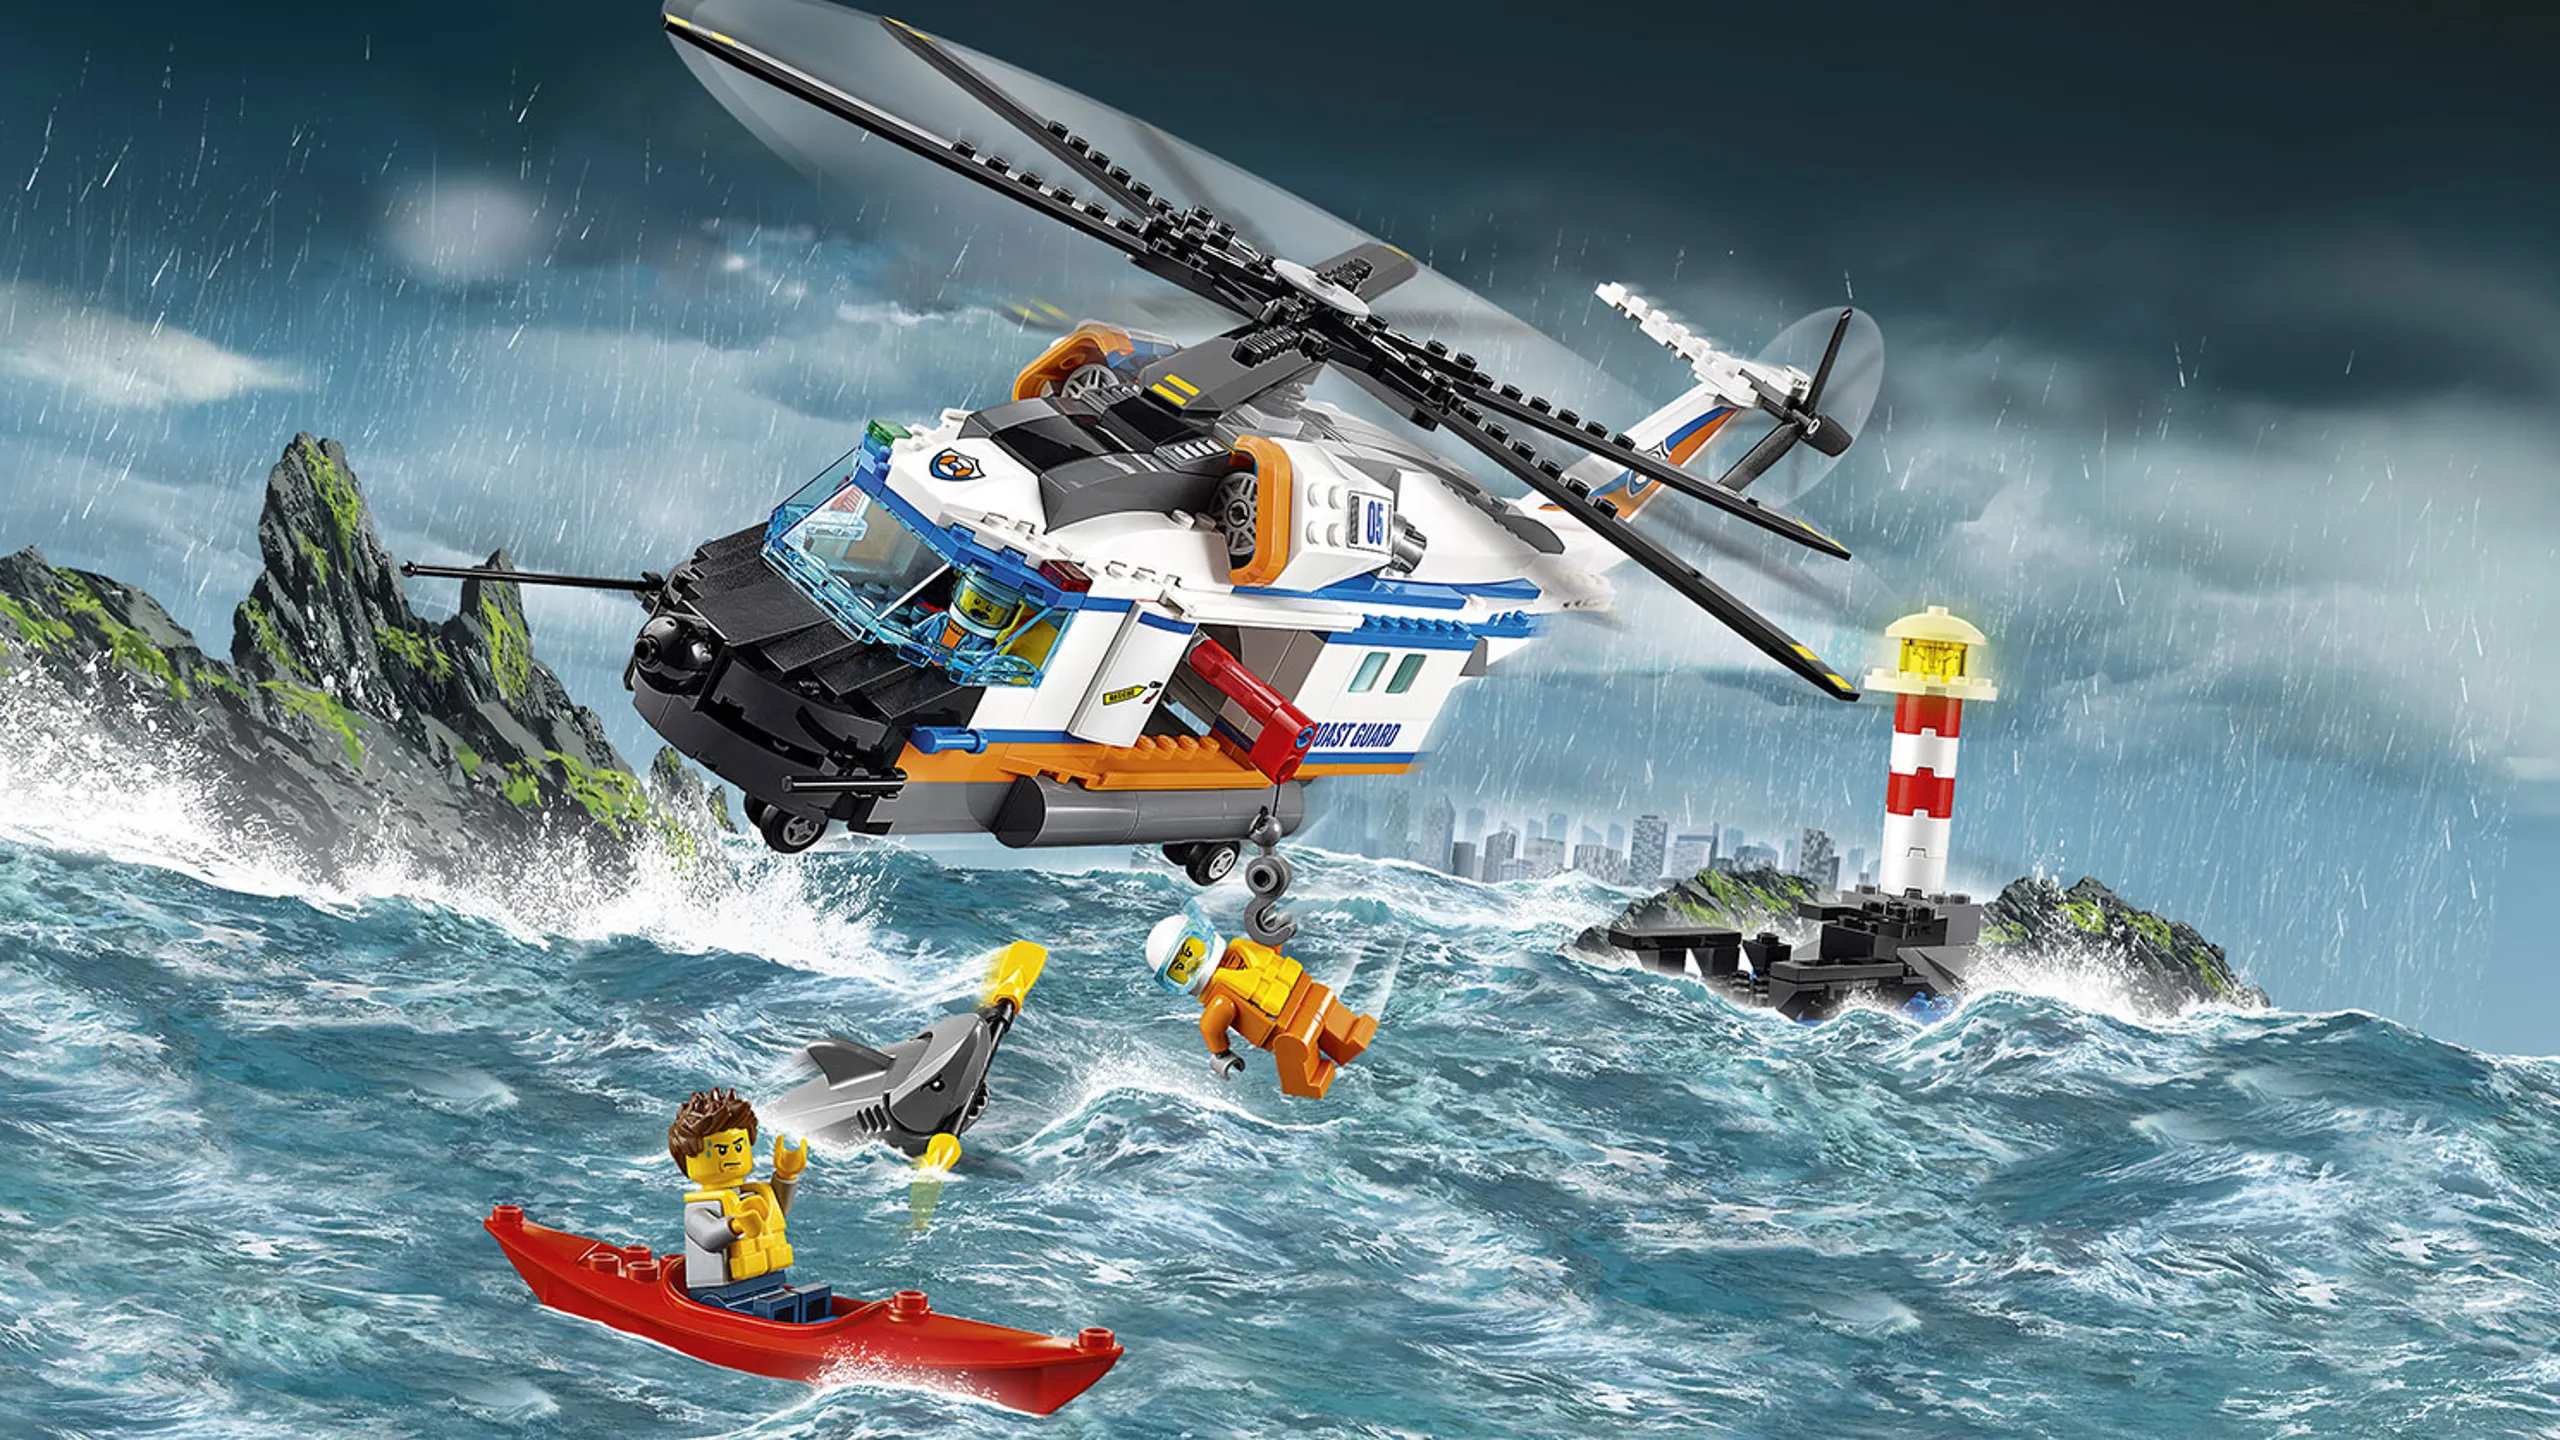 LEGO City Coast Guard - 60166 Heavy-Duty Rescue Helicopter - A shark attacked the kayak and the helicopter comes to the rescue!